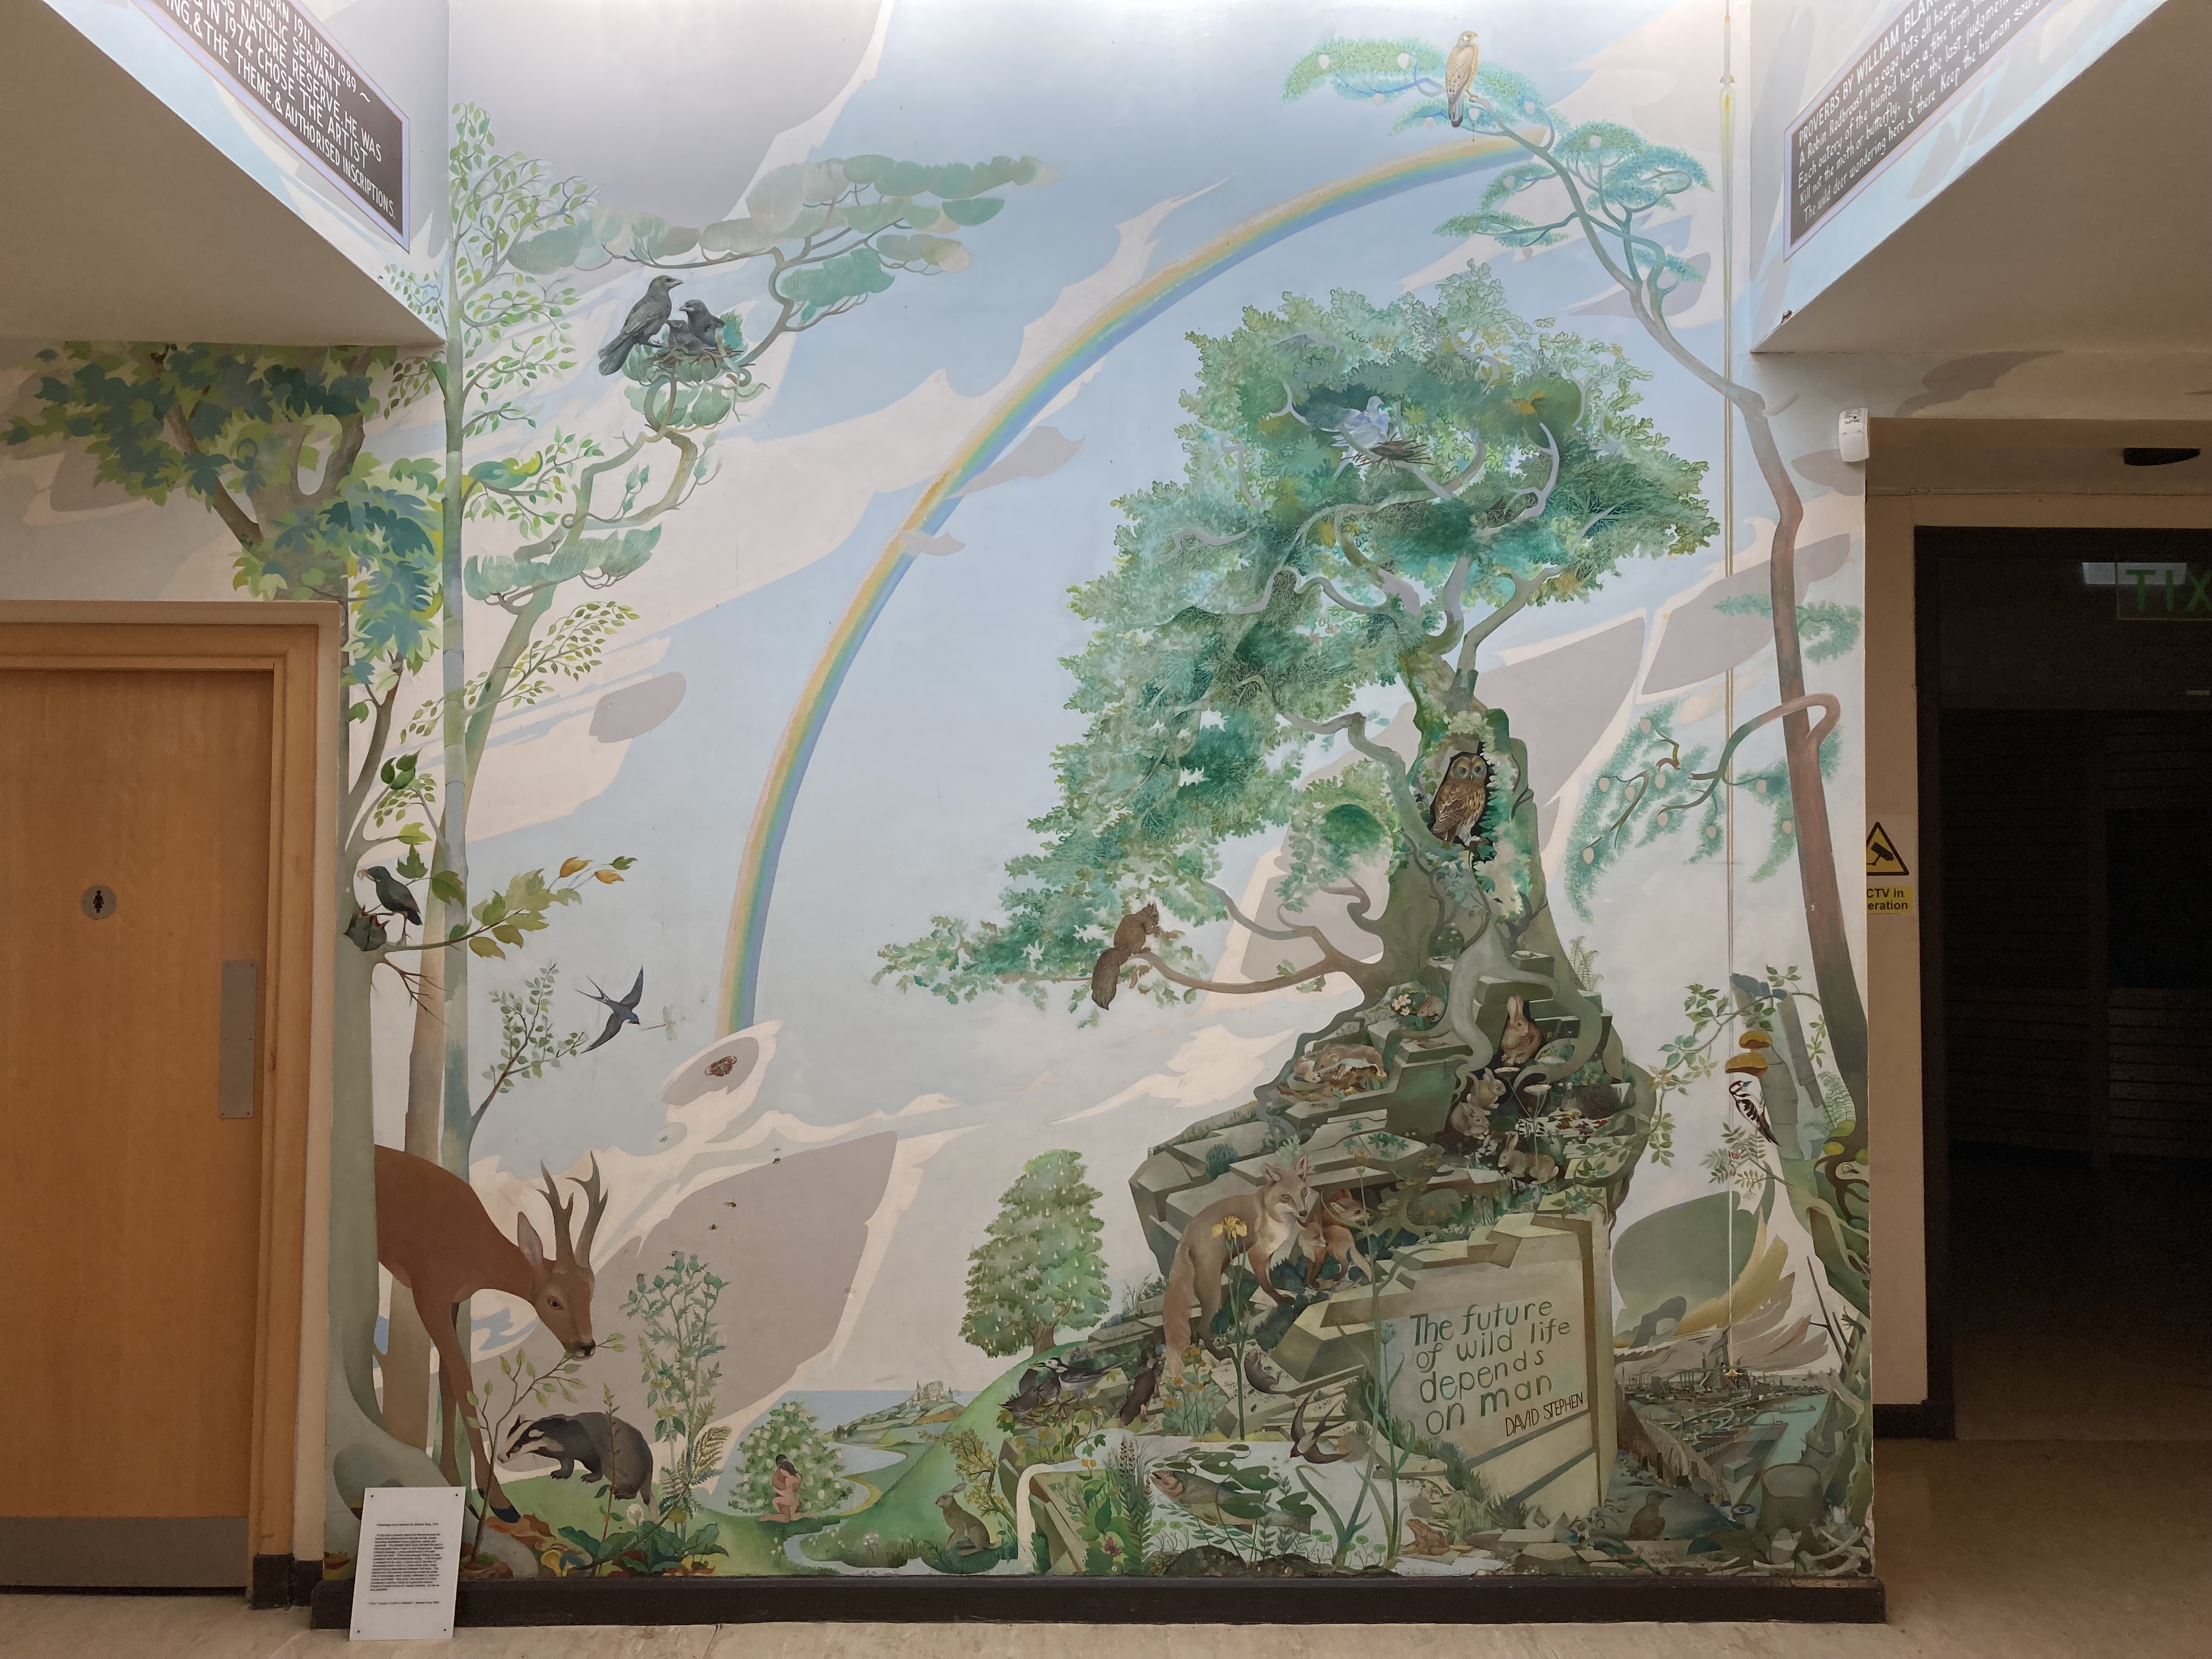 A mural depicting a countryside scene filled with wildlife including a deer